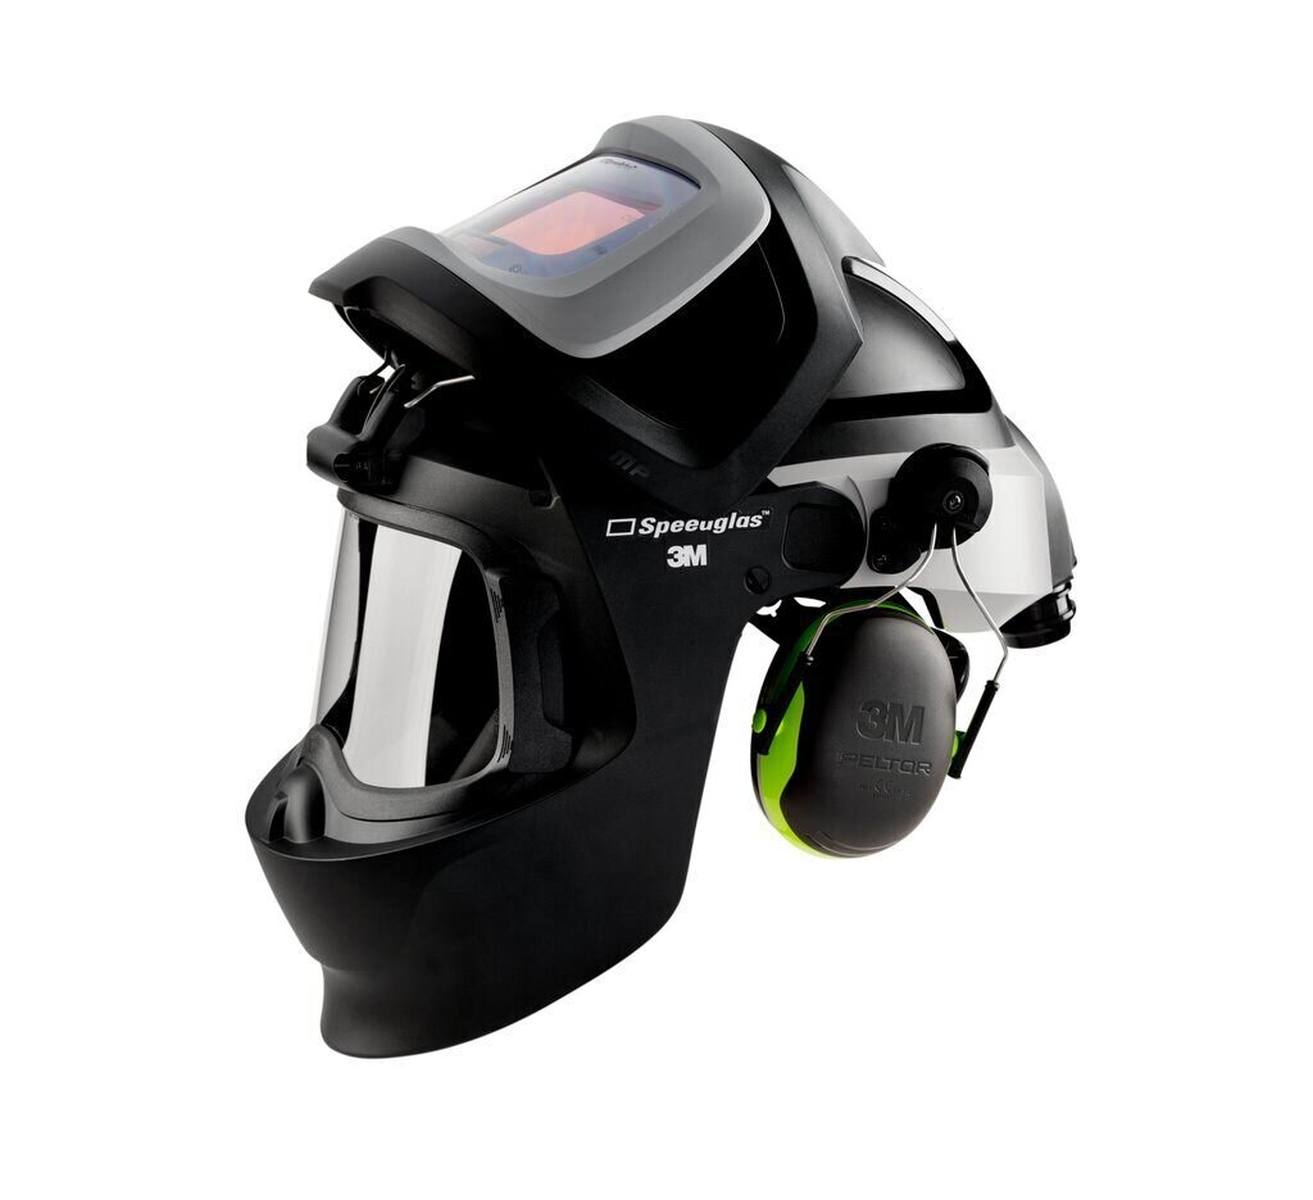 3M Speedglas 9100 MP welding mask, with 9100X ADF, with Adflo blower respirator, QRS air hose, 5333506 adapter, air flow meter, pre-filter, spark arrester, particle filter, lithium-ion battery and charger incl. storage bag #577715